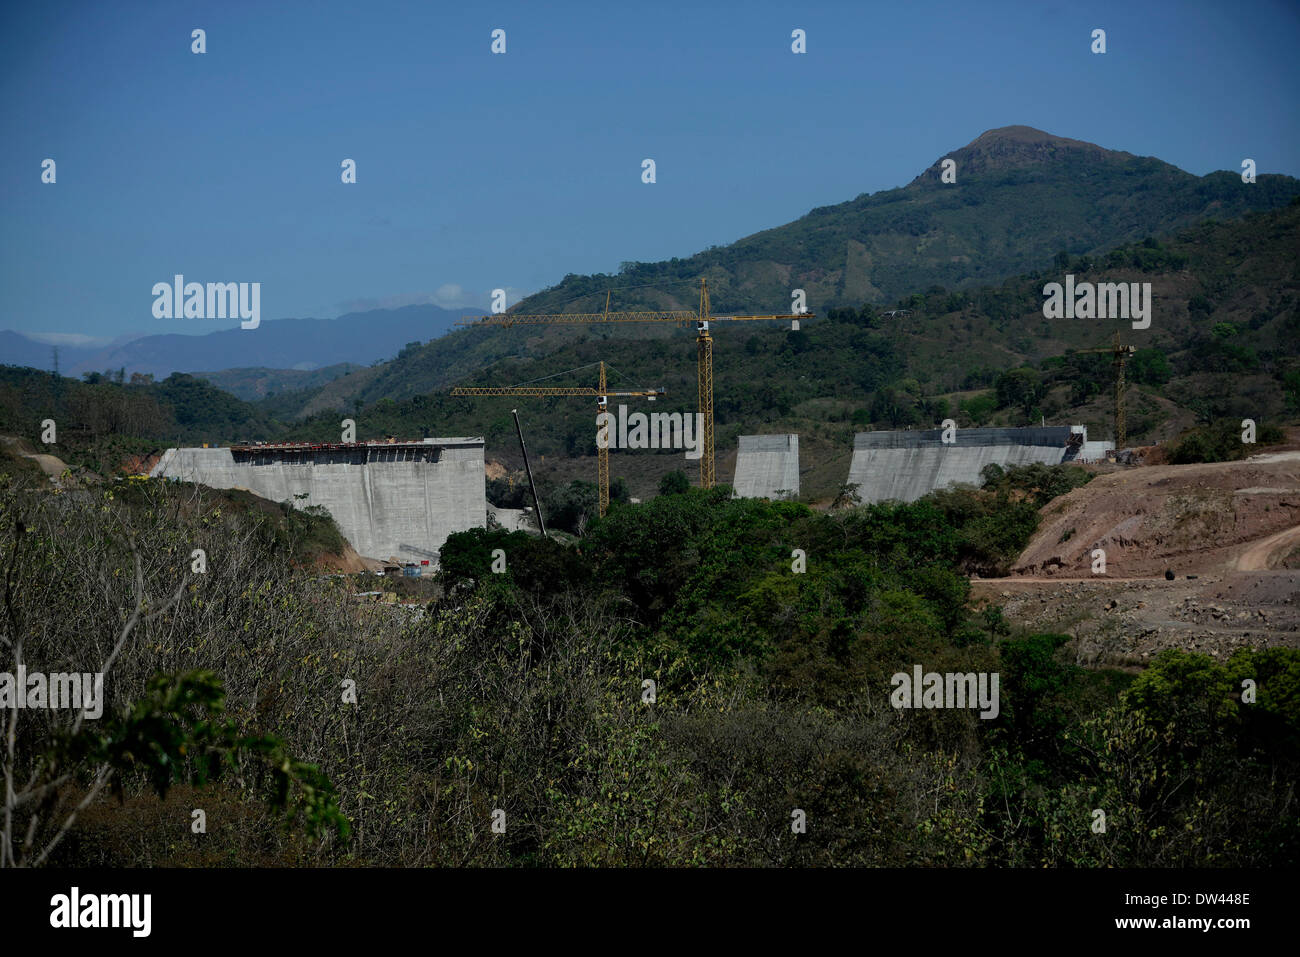 (140227) -- NGABE BUGLE REGION, Feb. 27, 2014 (Xinhua) -- The hydroelectric project 'Barro Blanco' is seen in Tole town, adjacent to the Ngabe Bugle indigenous region, 450 km west of Panama City, capital of Panama, on Feb. 26, 2014. The Ngabe Bugle indigenous region is located in the western region of Panama, and covers an area of 6,968 square km, with 91 per cent of its population living in extreme poverty. Native leaders of the Ngabe Bugle region declared a 'national alert', because of the eviction notice issued by a company which is developing the hydro-electric project 'Barro Blanco'. The Stock Photo